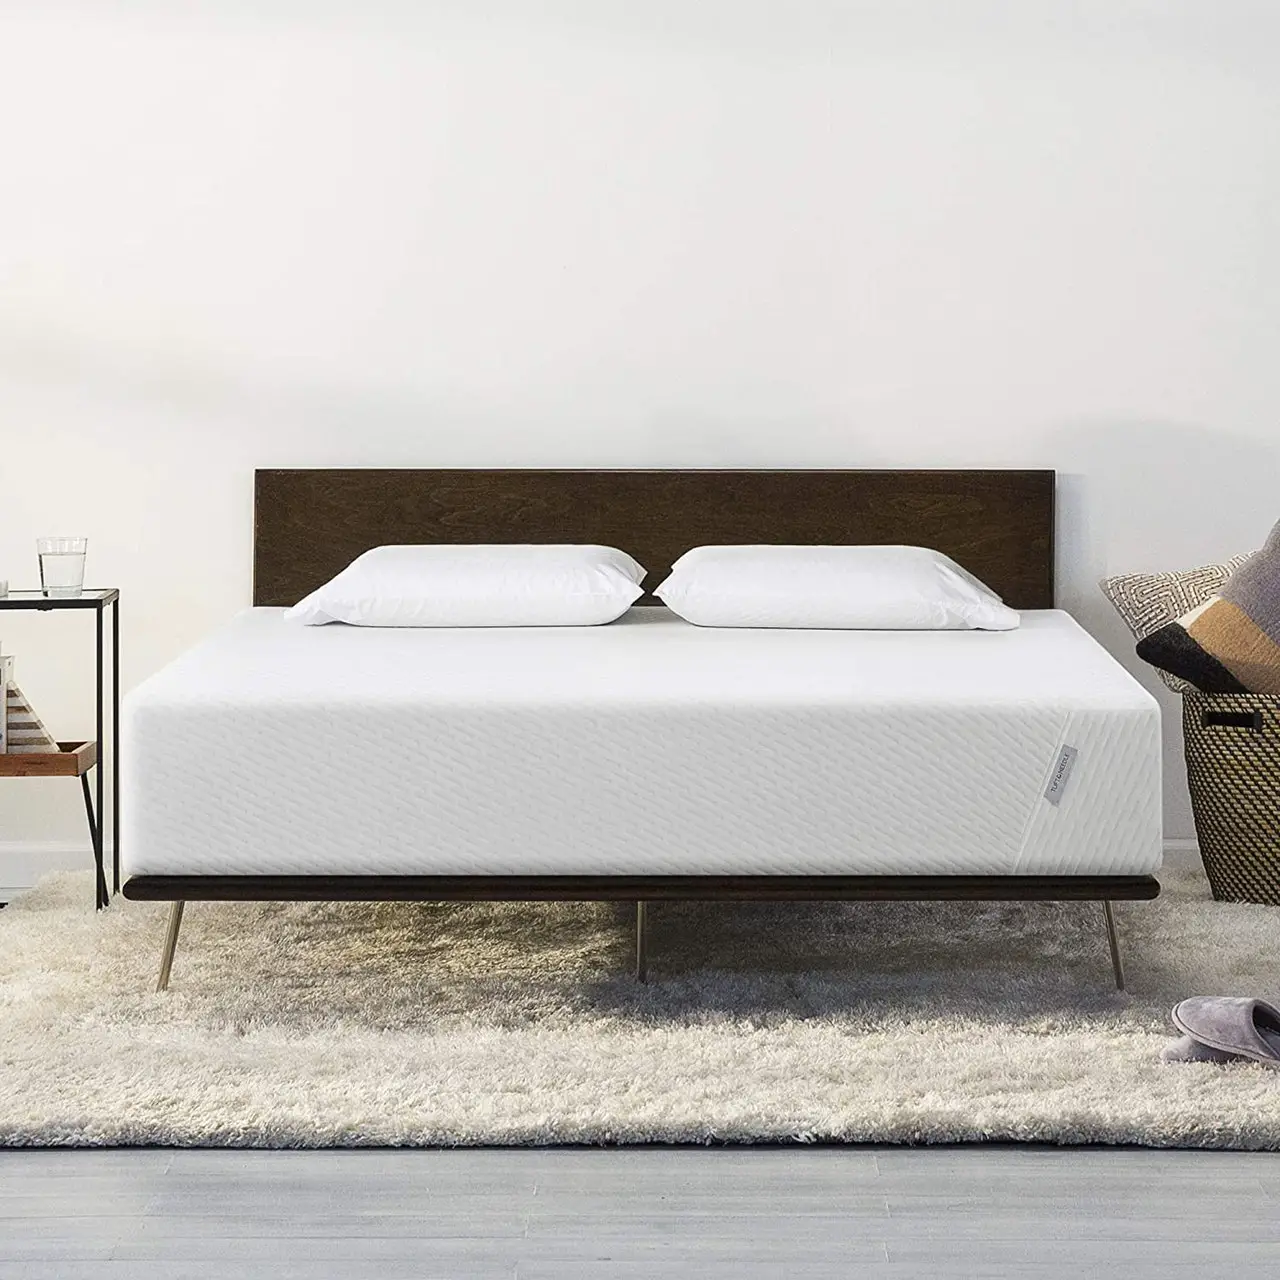 Why Black Friday Is the Best Time to Buy a New Mattress